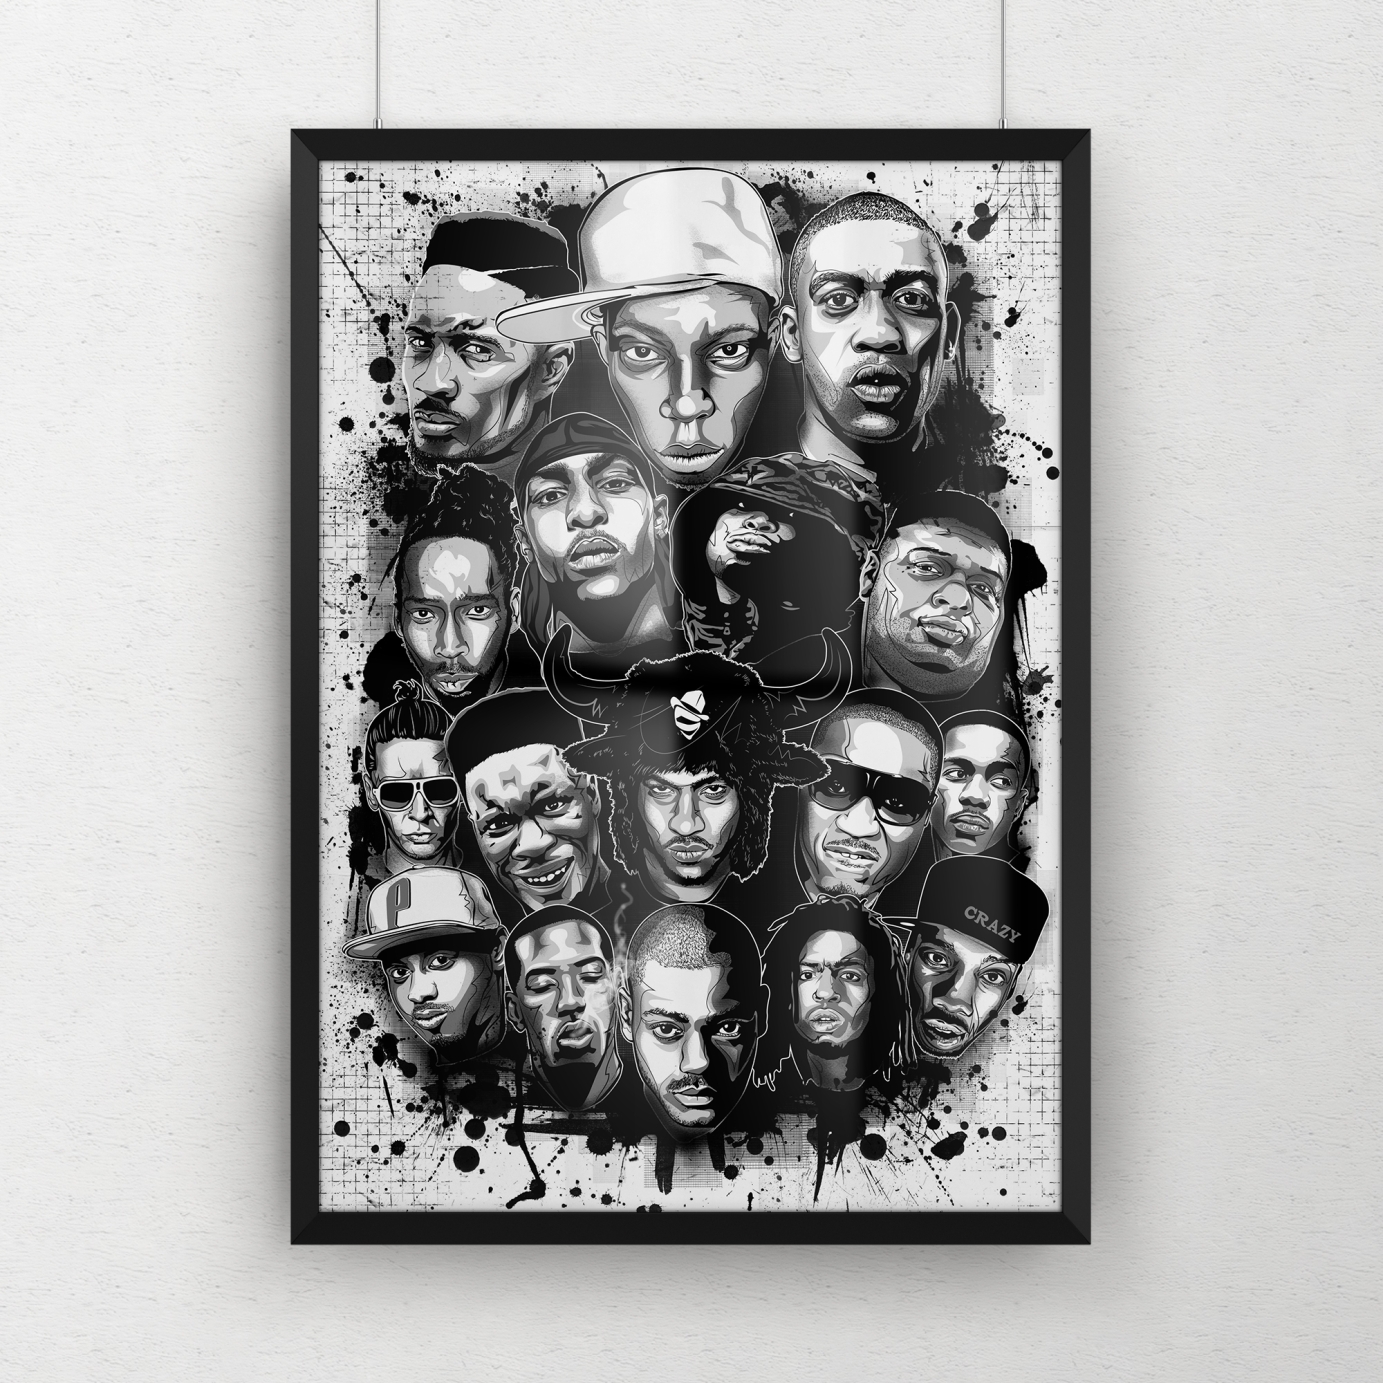 Art piece celebrating UK Grime in the golden era of the early 2000's